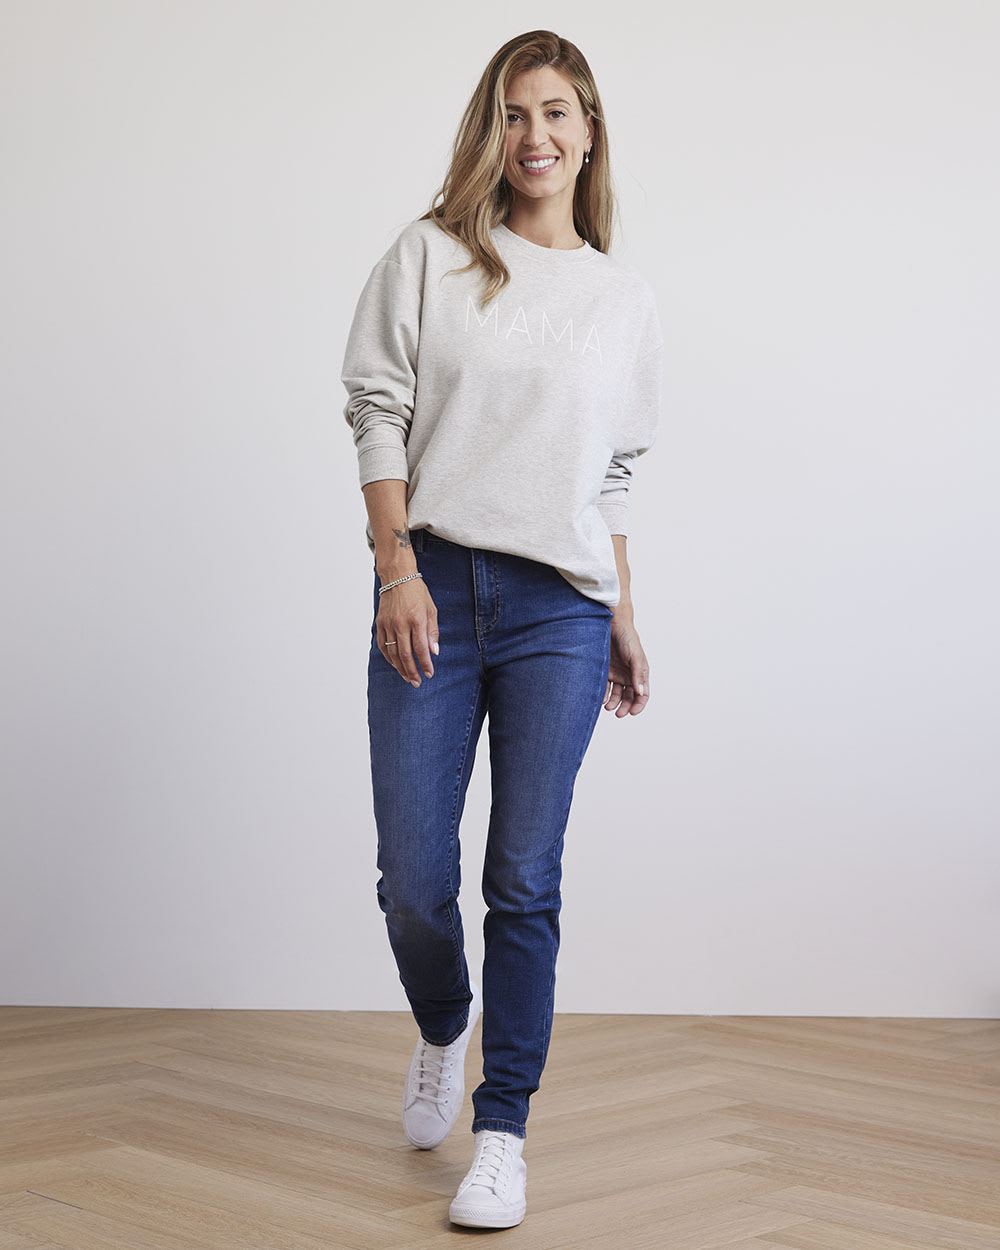 Relaxed-Fit French Terry "Mama" Sweatshirt - Thyme Maternity